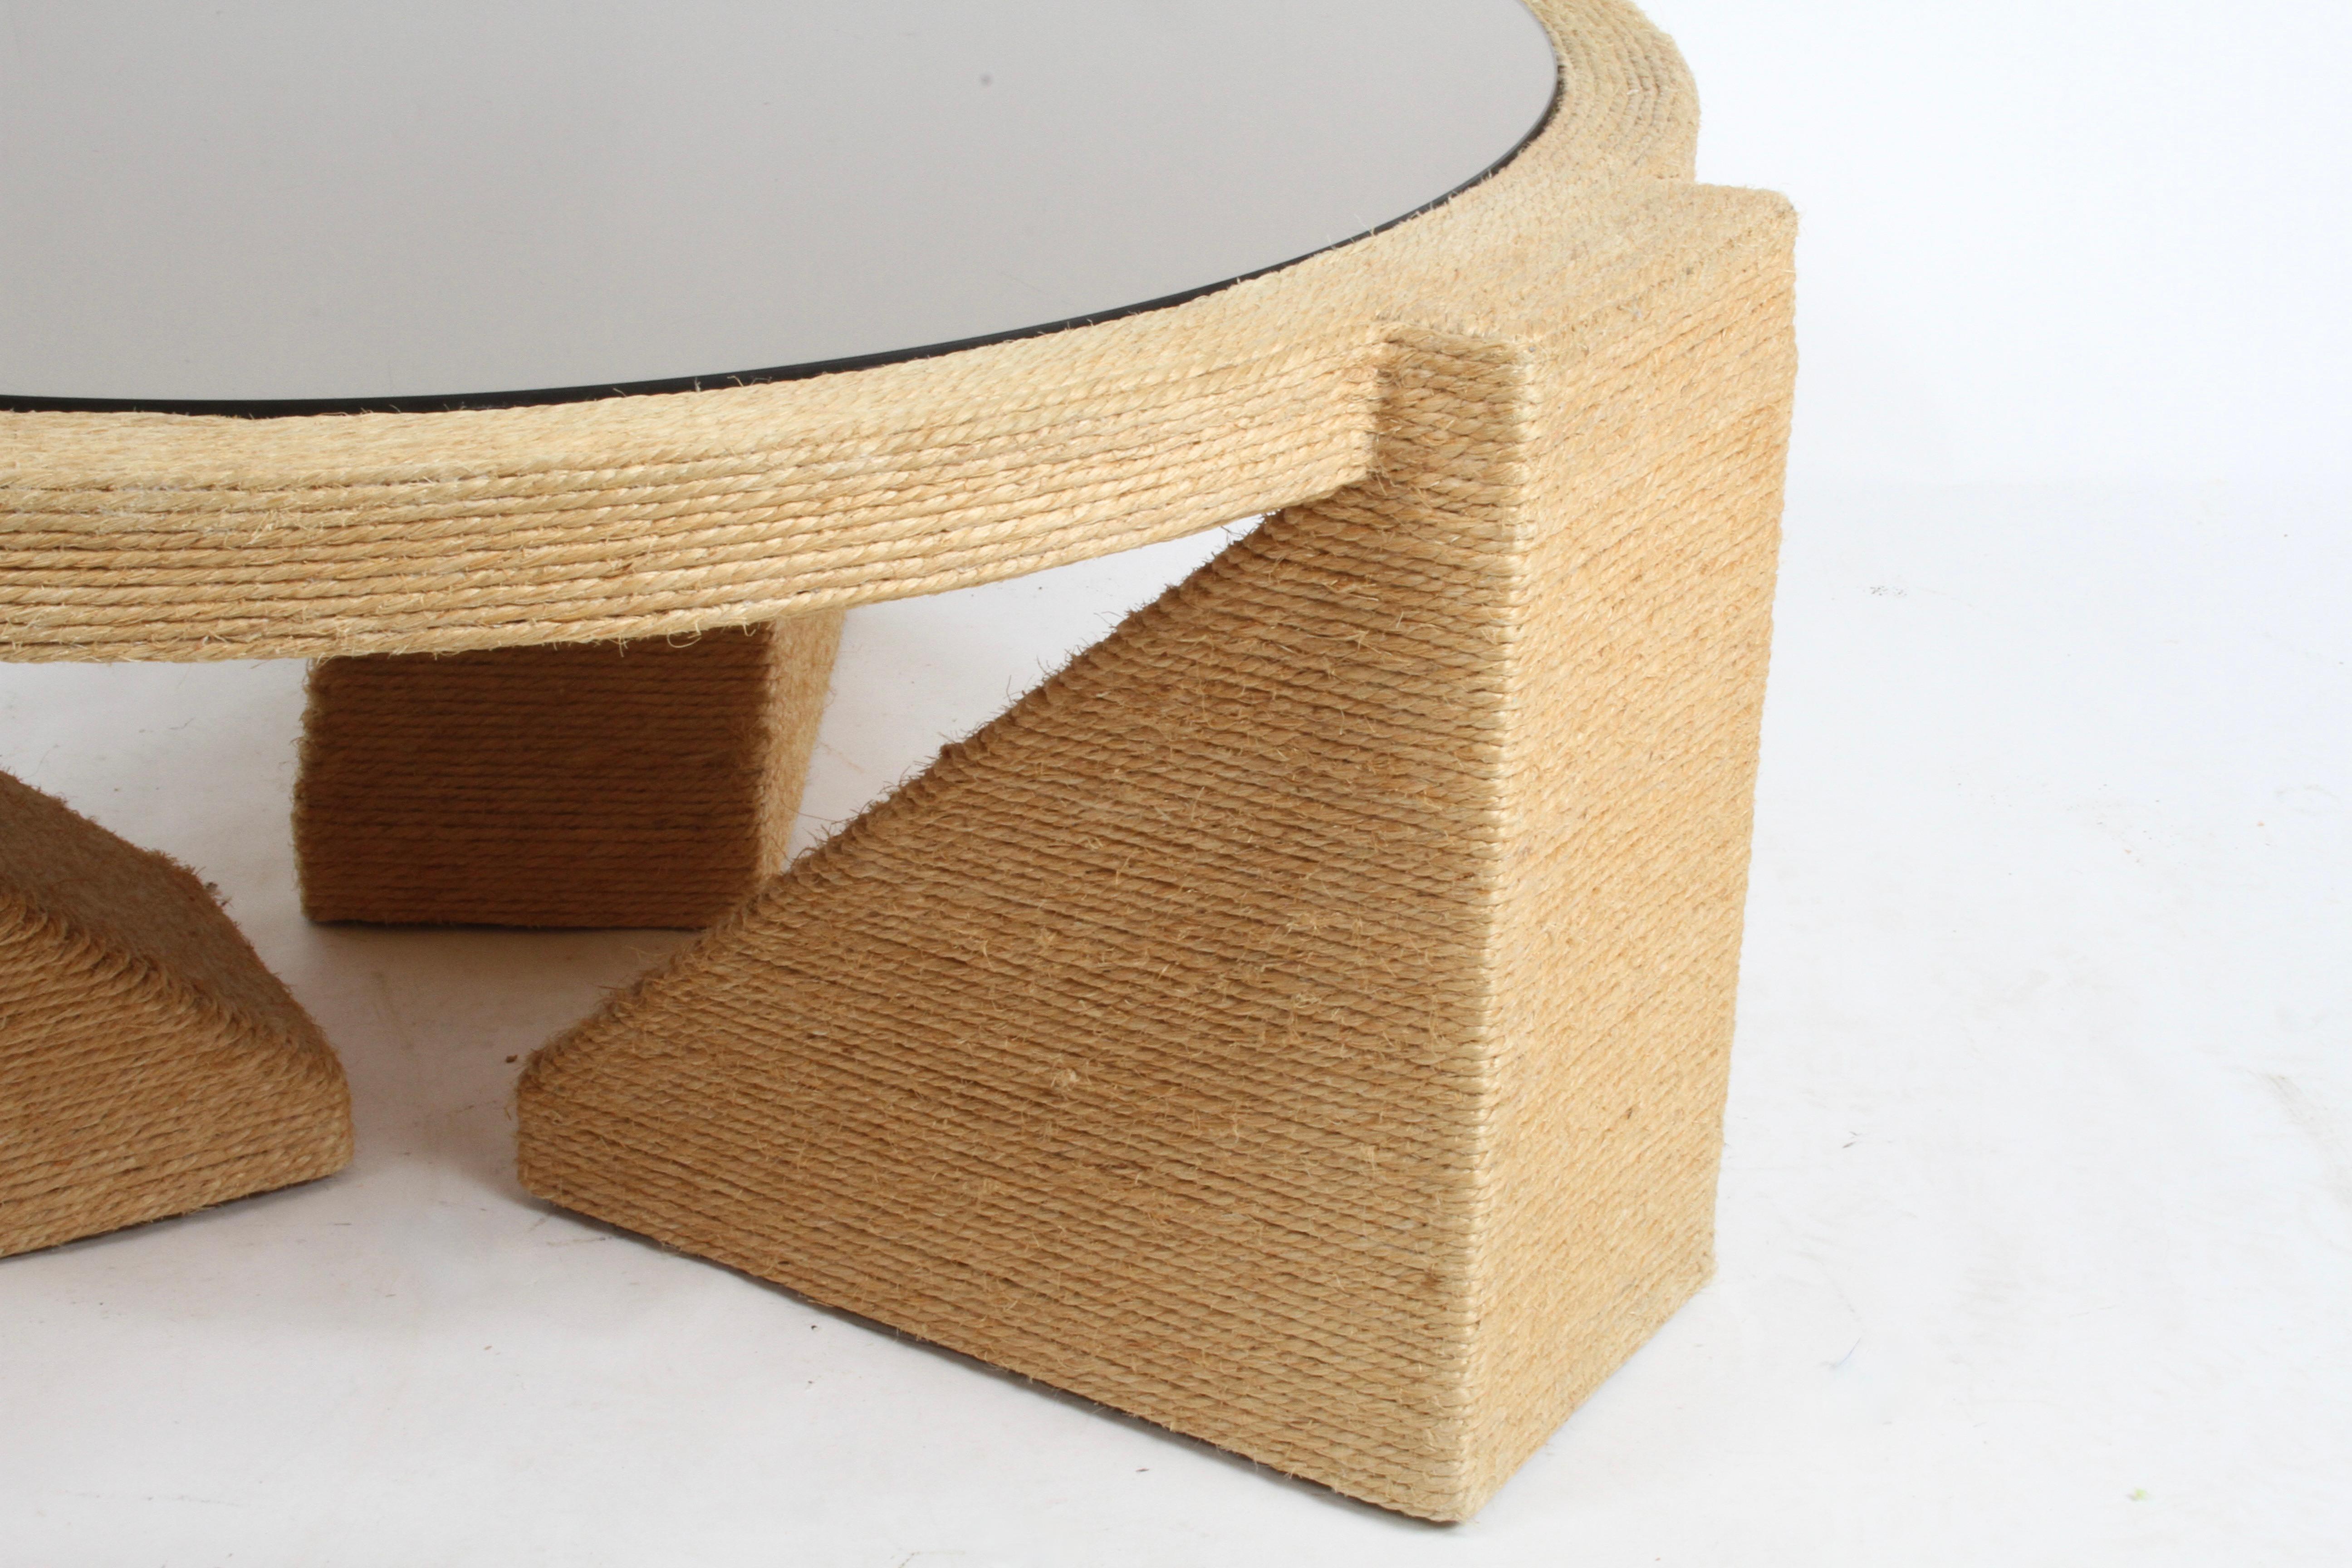 Sculptural 1970s Jute Rope Wrapped Round Coffee Table with Bronze Mirror Top For Sale 2